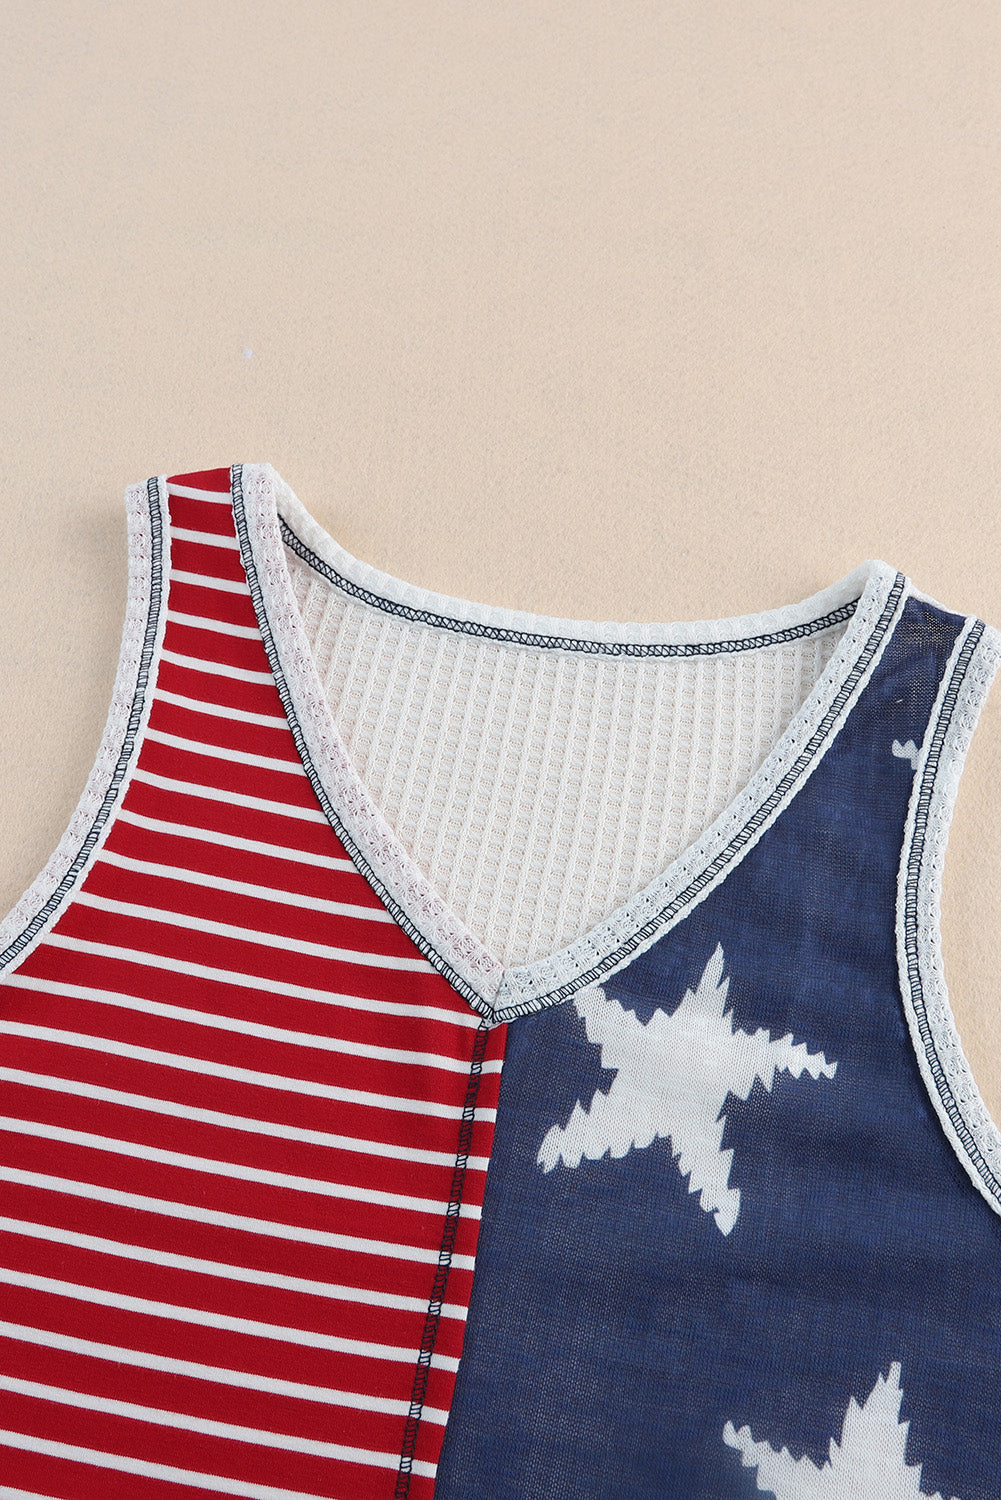 American Flag Stars and Stripes Tank Top